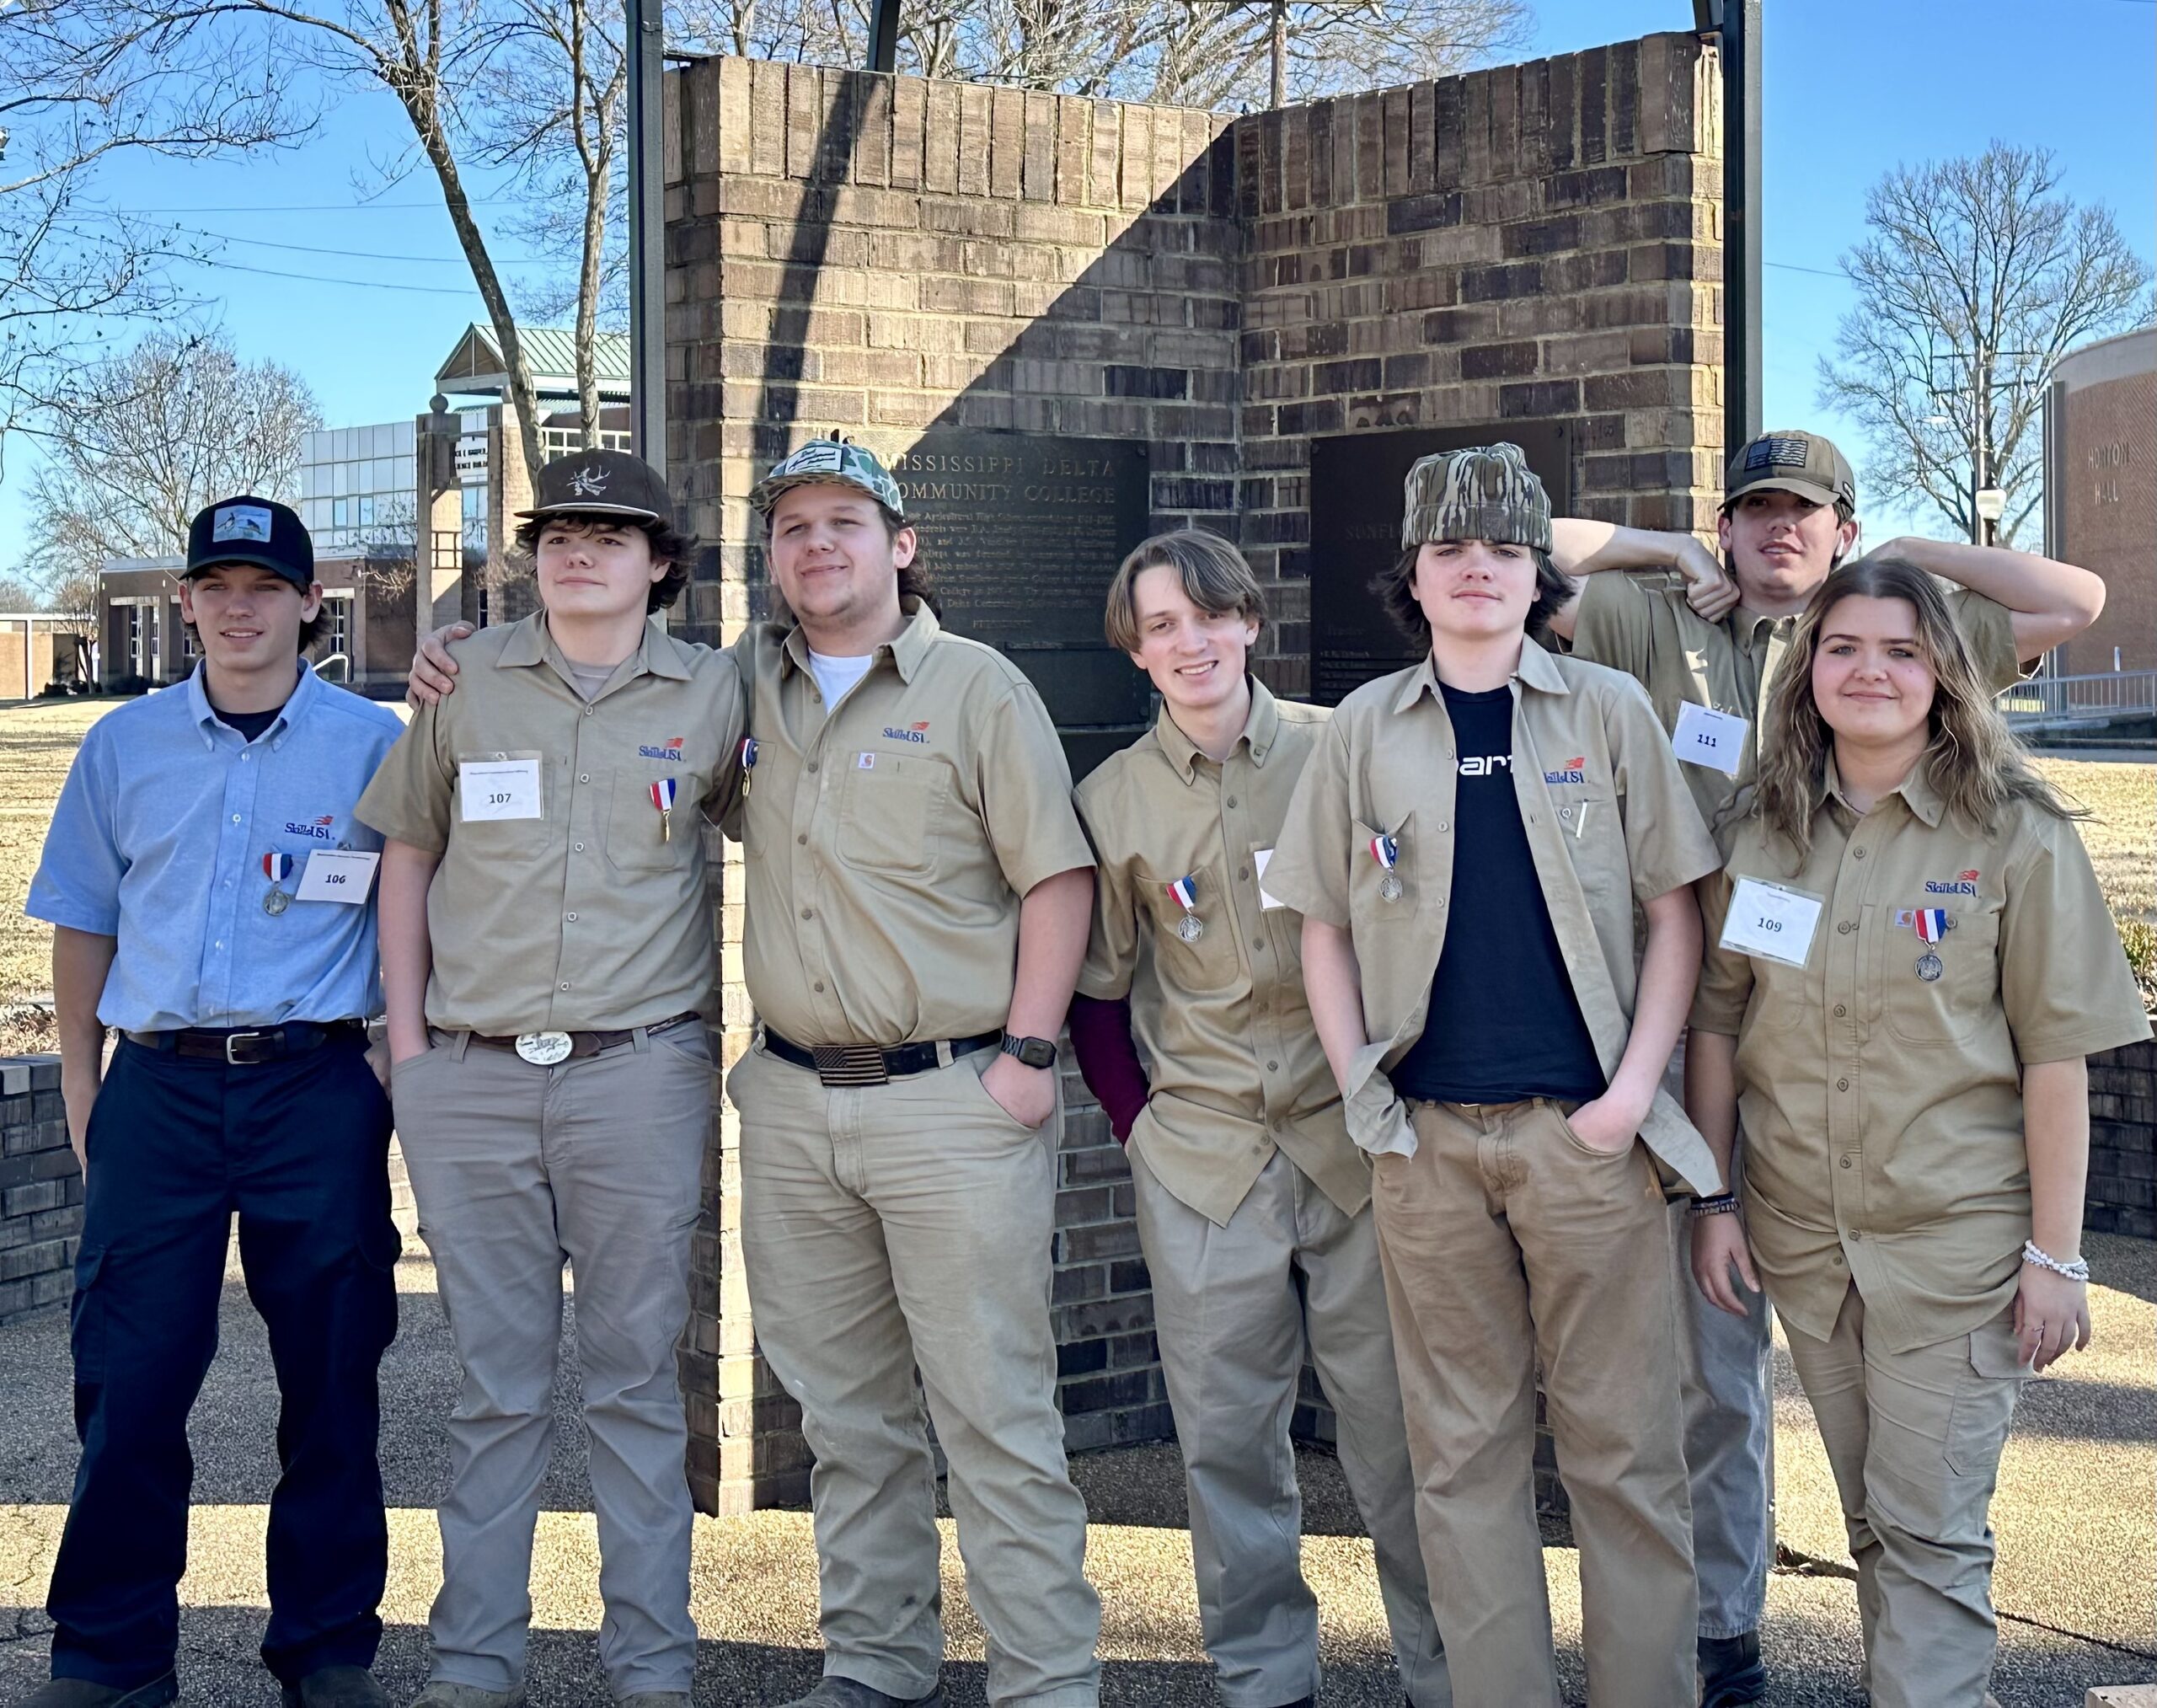 The following students from the New Albany School of Career & Technical Education placed in the SkillsUSA Regional Competition at Mississippi Delta Community College on February 6 (l-r): Reed Taylor - Silver in Auto Service; Jax Gannon - Gold in Electric; Jamison Miller - Gold in Cabinet Making; and Jamison Garvey, Gage Harrell, John Davis and Isabelle Grose - Silver in Teamworks. All of these students will advance to the SkillsUSA State Competition. Rick Robbins, Jonathan Garrison and Kevin Wigington are the SkillsUSA advisors.